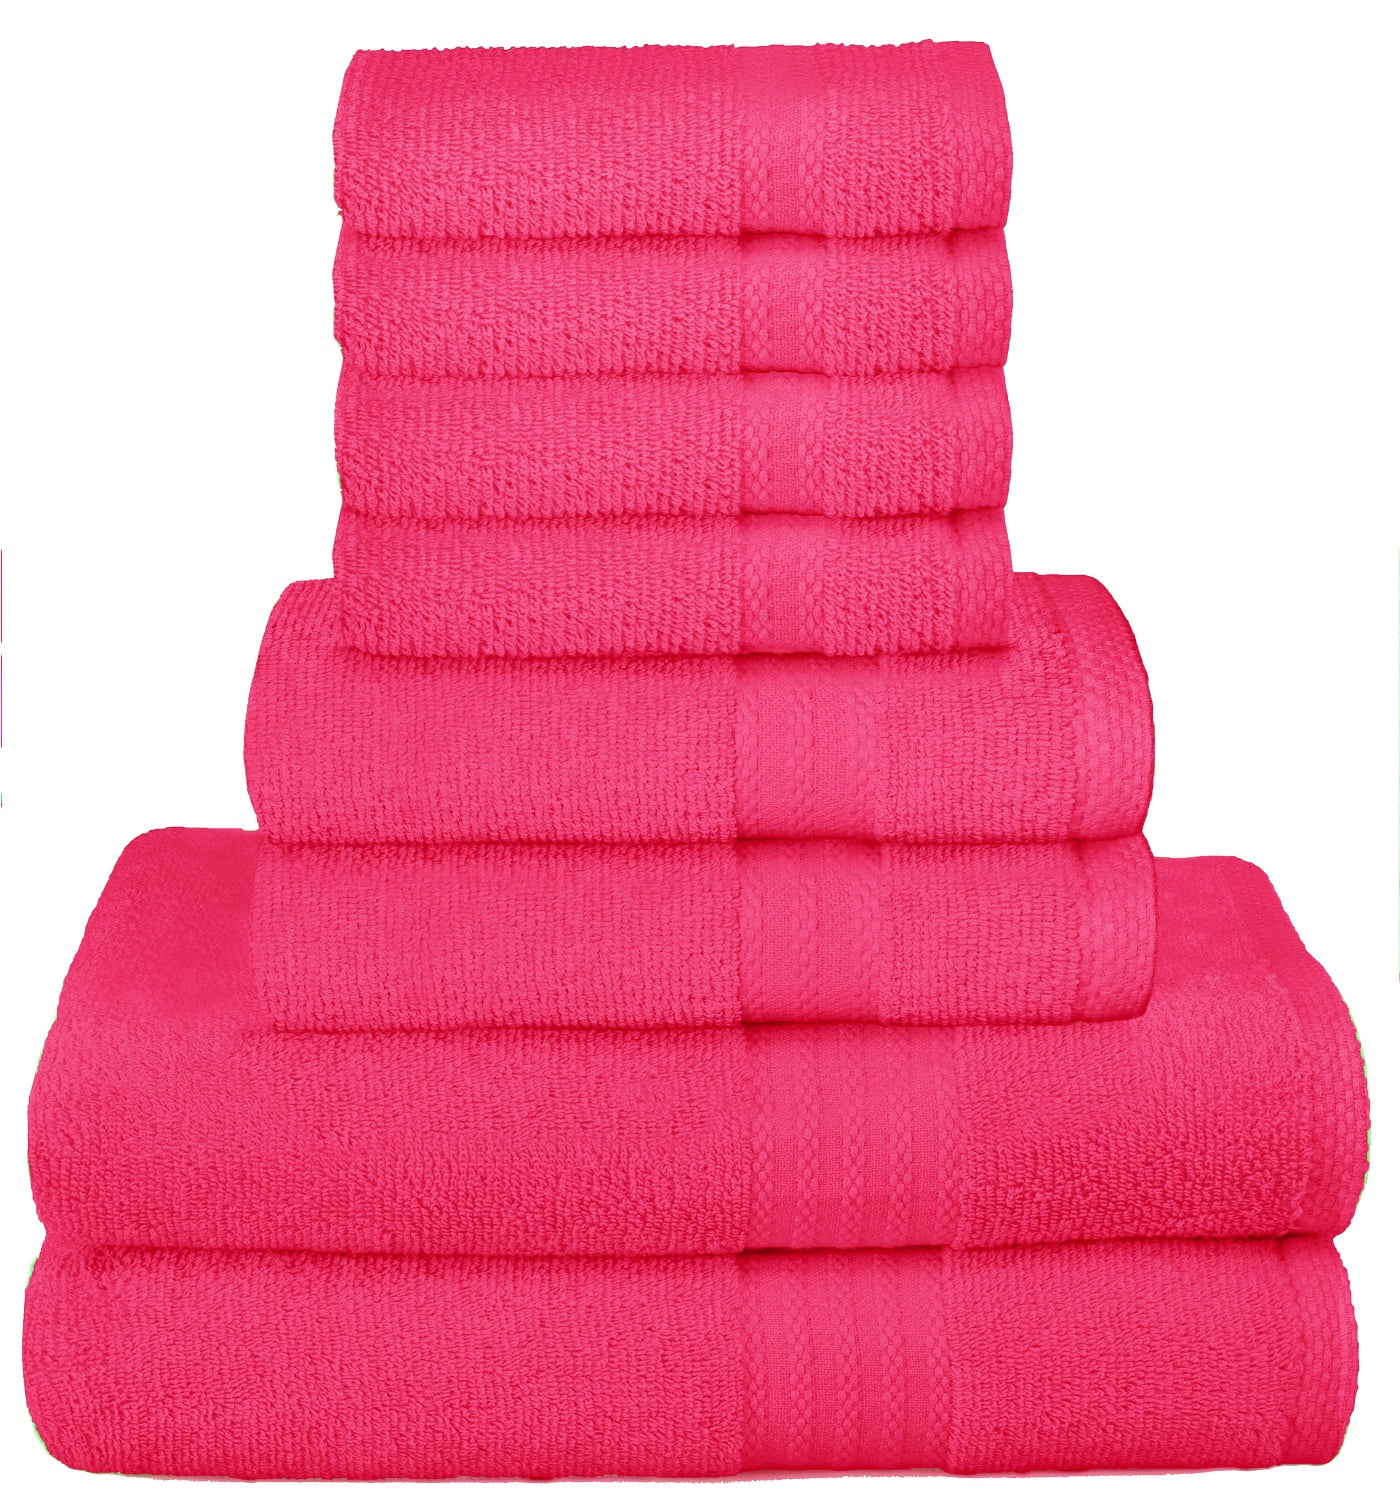 COTTON CRAFT Ultra Soft 6 Piece Towel Set - 2 Oversized Large Bath Towels,2  Hand Towels,2 Washcloths - Absorbent Quick Dry Everyday Luxury Hotel